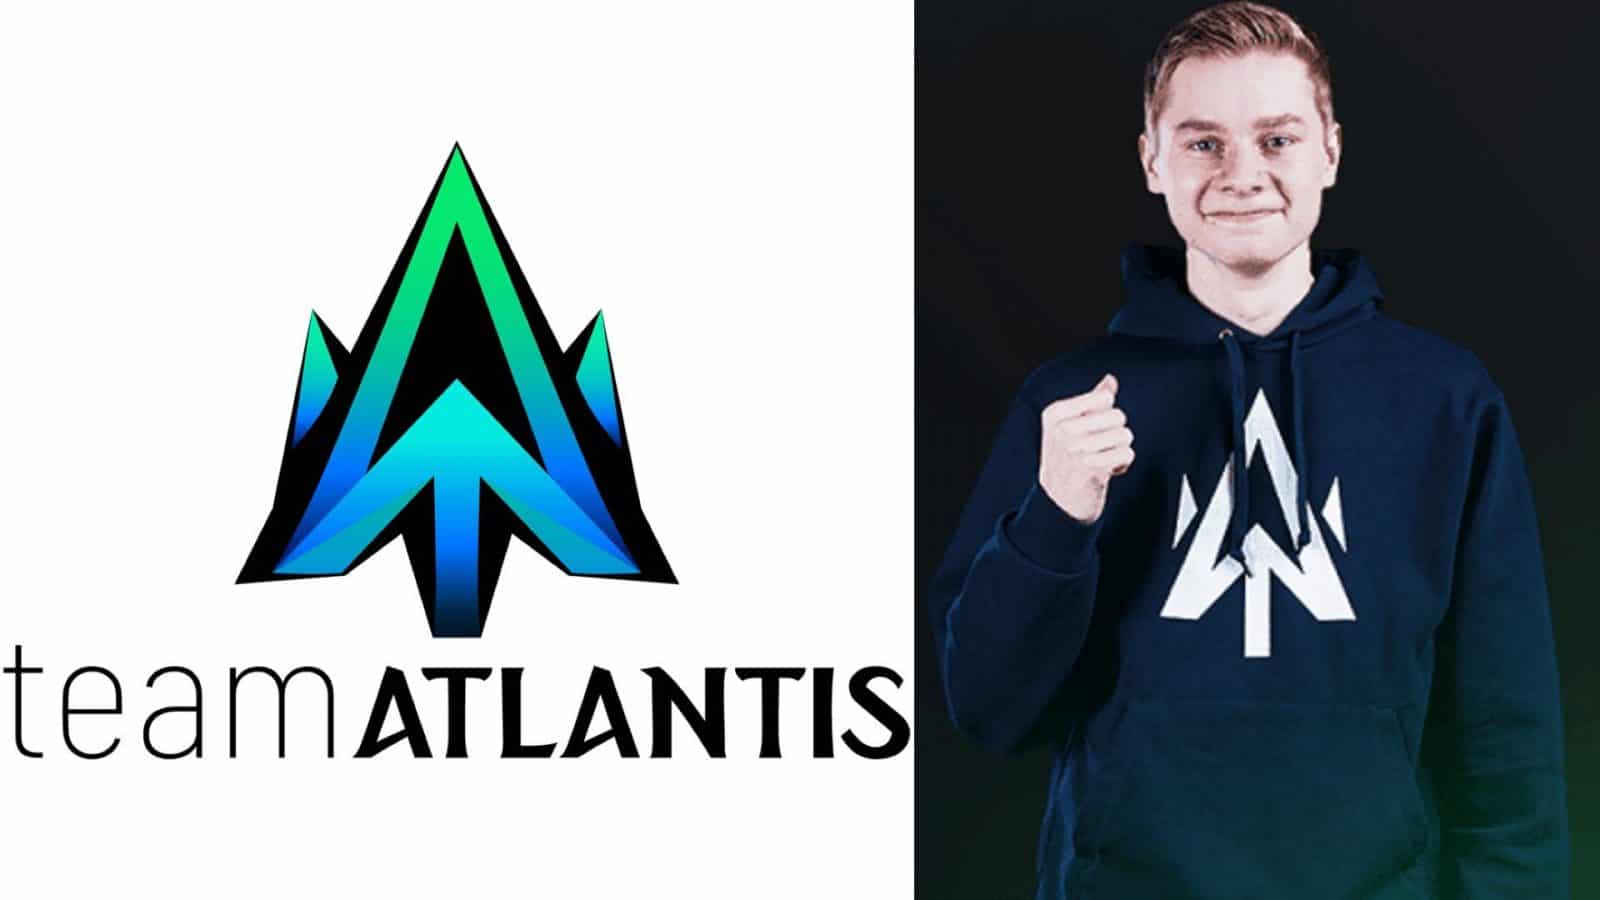 Team Atlantis and mitr0 Release Joint Statements, mitr0 Granted Release